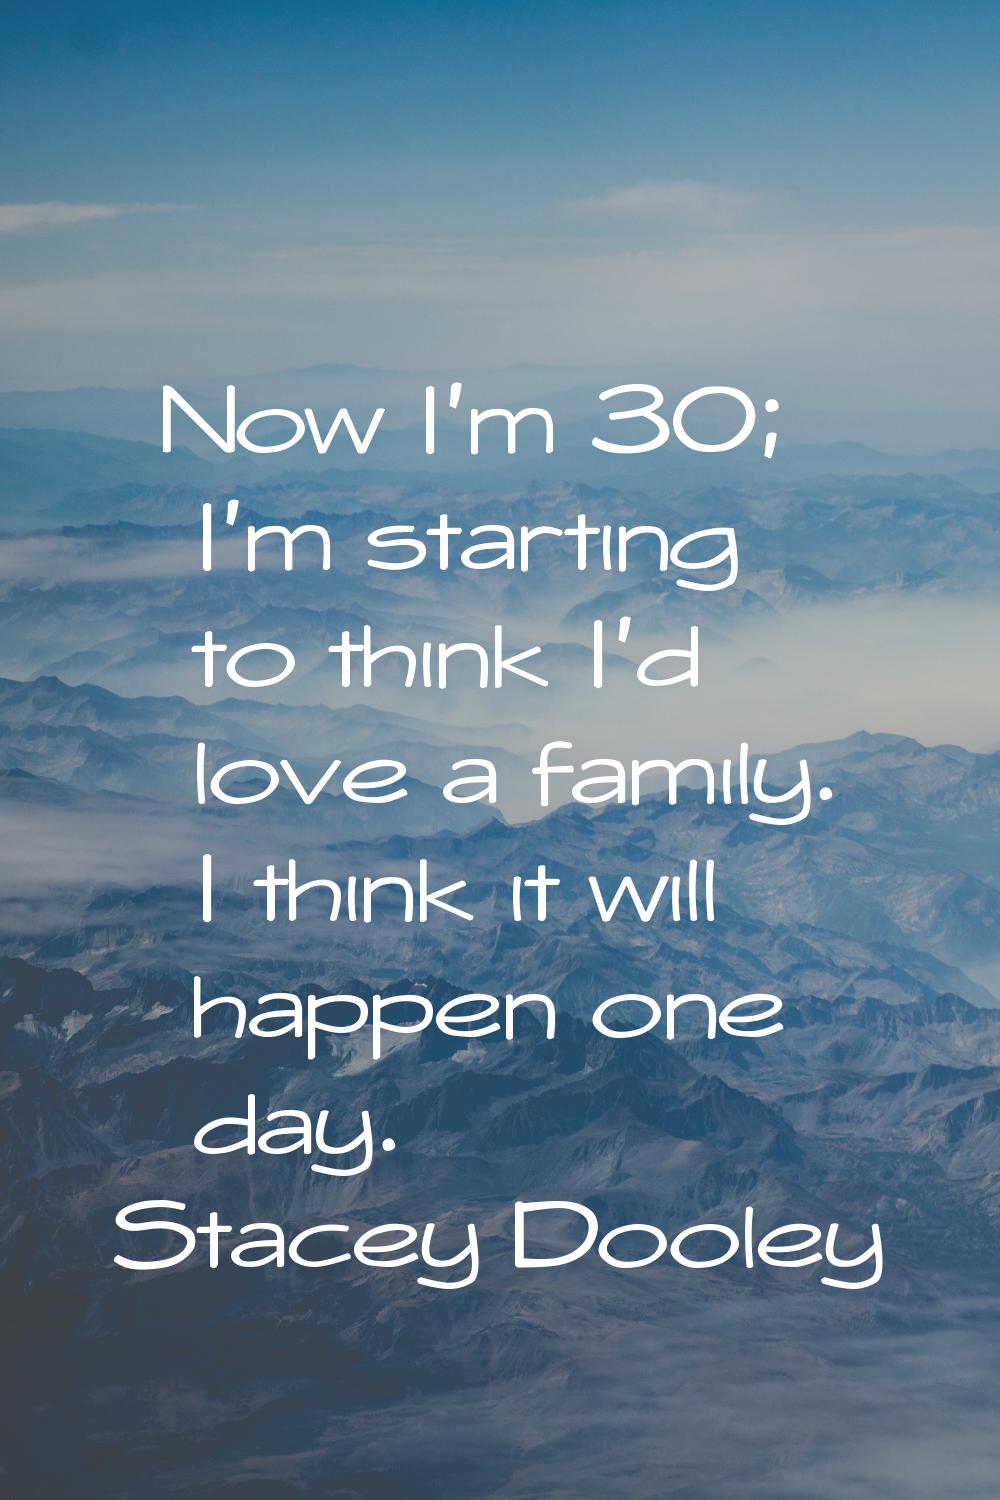 Now I'm 30; I'm starting to think I'd love a family. I think it will happen one day.